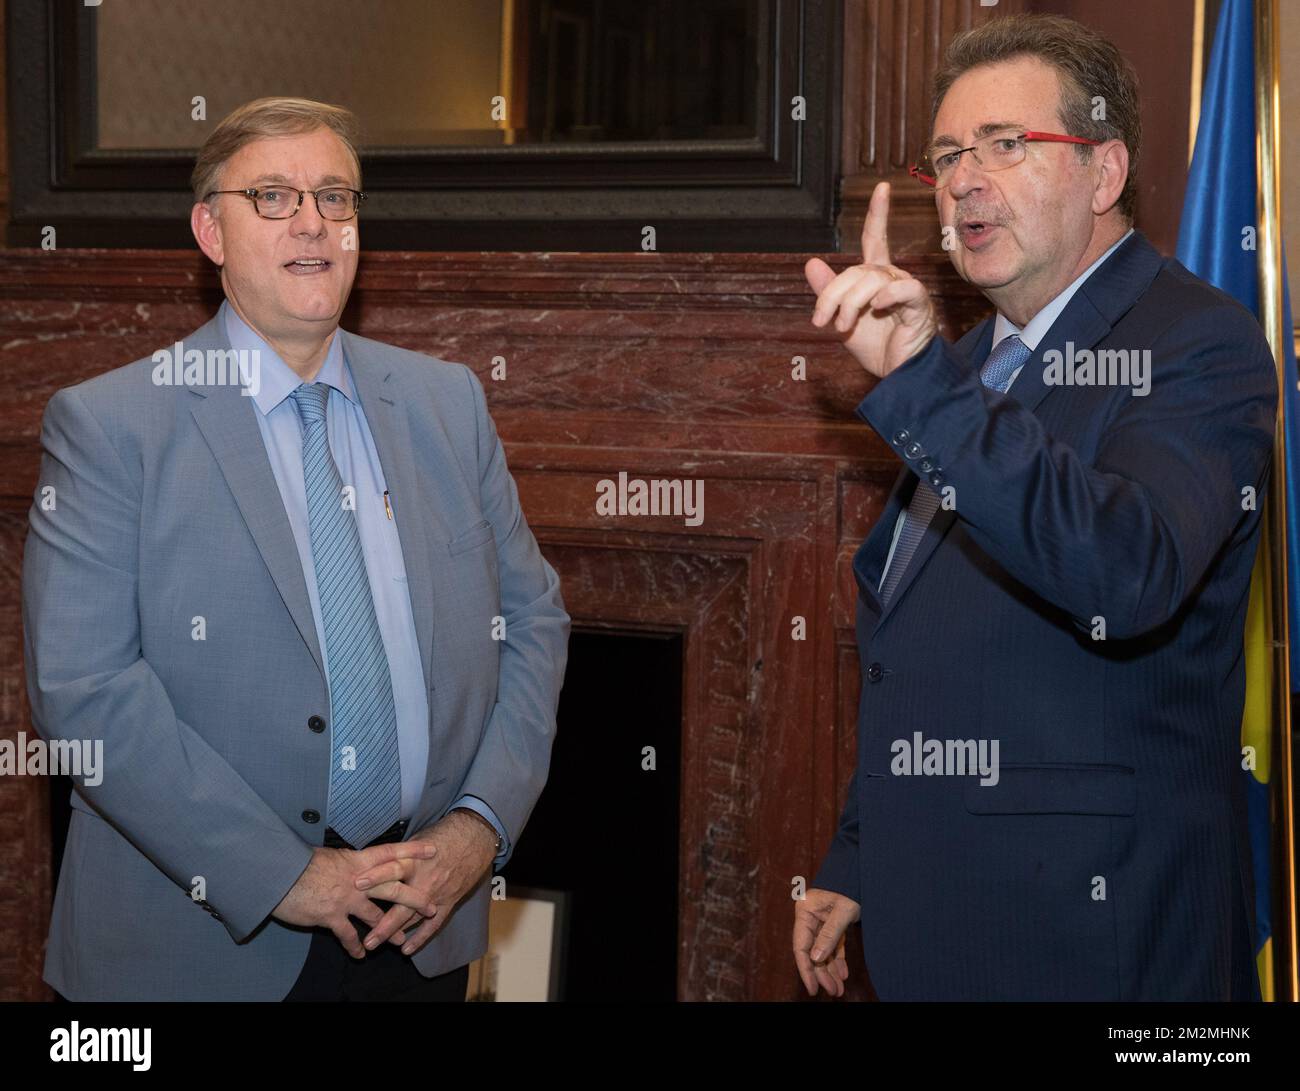 Etterbeek mayor Vincent De Wolf and Brussels region Minister-President Rudi Vervoort pictured during the oath ceremony for the future mayor of Brussels region cities, Monday 26 November 2018. BELGA PHOTO BENOIT DOPPAGNE Stock Photo